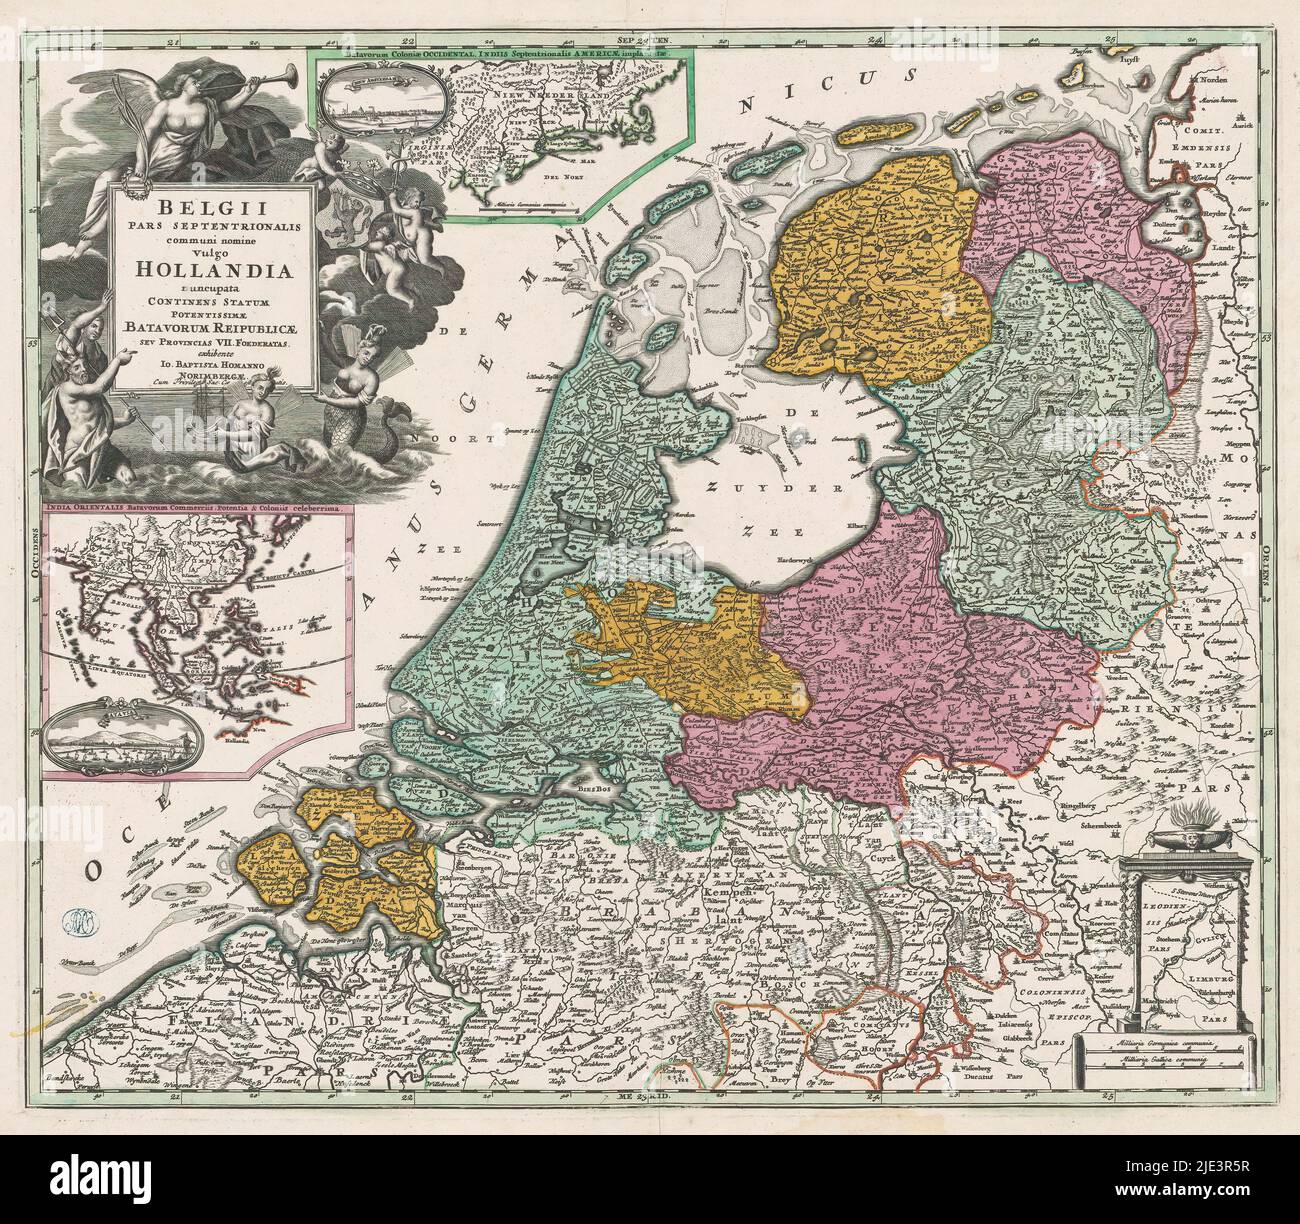 Map of the Republic of the Seven United Netherlands, Belgii pars septentrionalis communi nomine vulgo Hollandia (...) (title on object), Top left cartouche with title, around which are depicted several figures, including: Neptune, Fama, three putti bearing the coat of arms of the Republic and two mermaids. To the right of the title cartouche an inset map of New Netherland and an oval cityscape of New Amsterdam, accompanying scale stick: Milliaria Germanica communia. Below the title cartouche an inset map of the East Indies and an oval cityscape of Batavia. Bottom right an inset map of part of Stock Photo